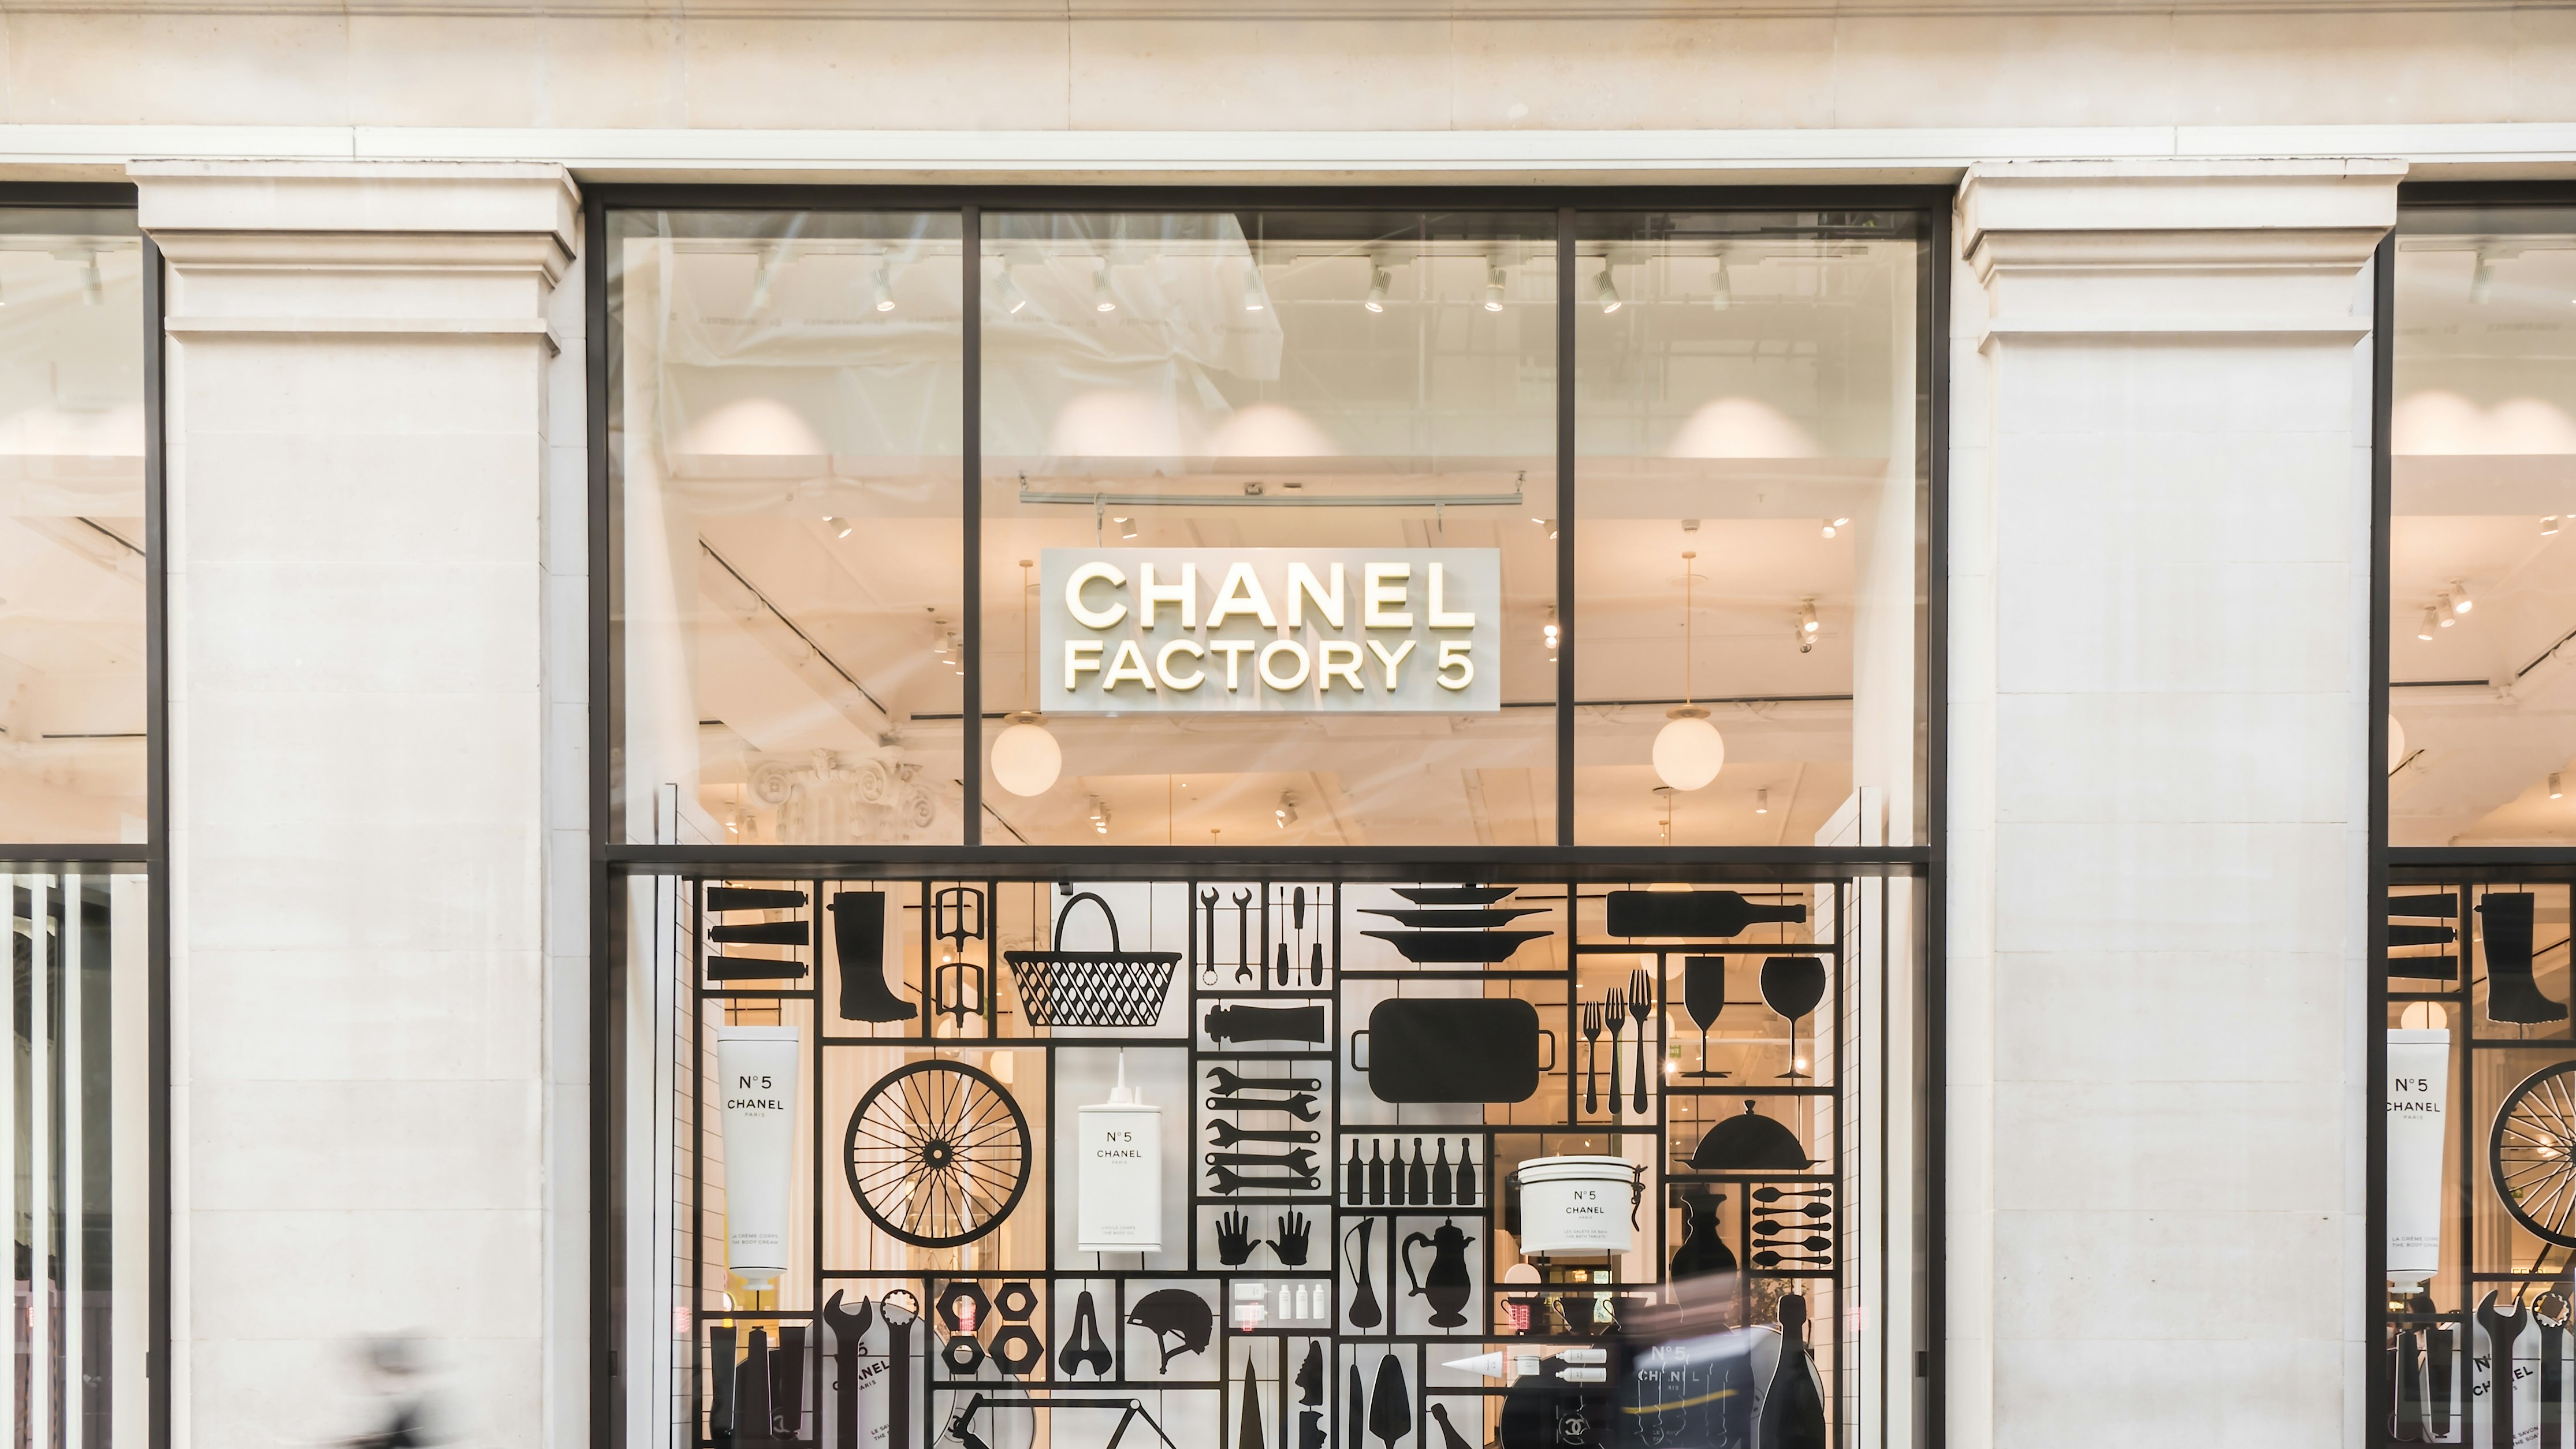 Chanel's No. 5 Factory Collection Is Here! 17 New Reasons to Fall in Love  With the Iconic Fragrance